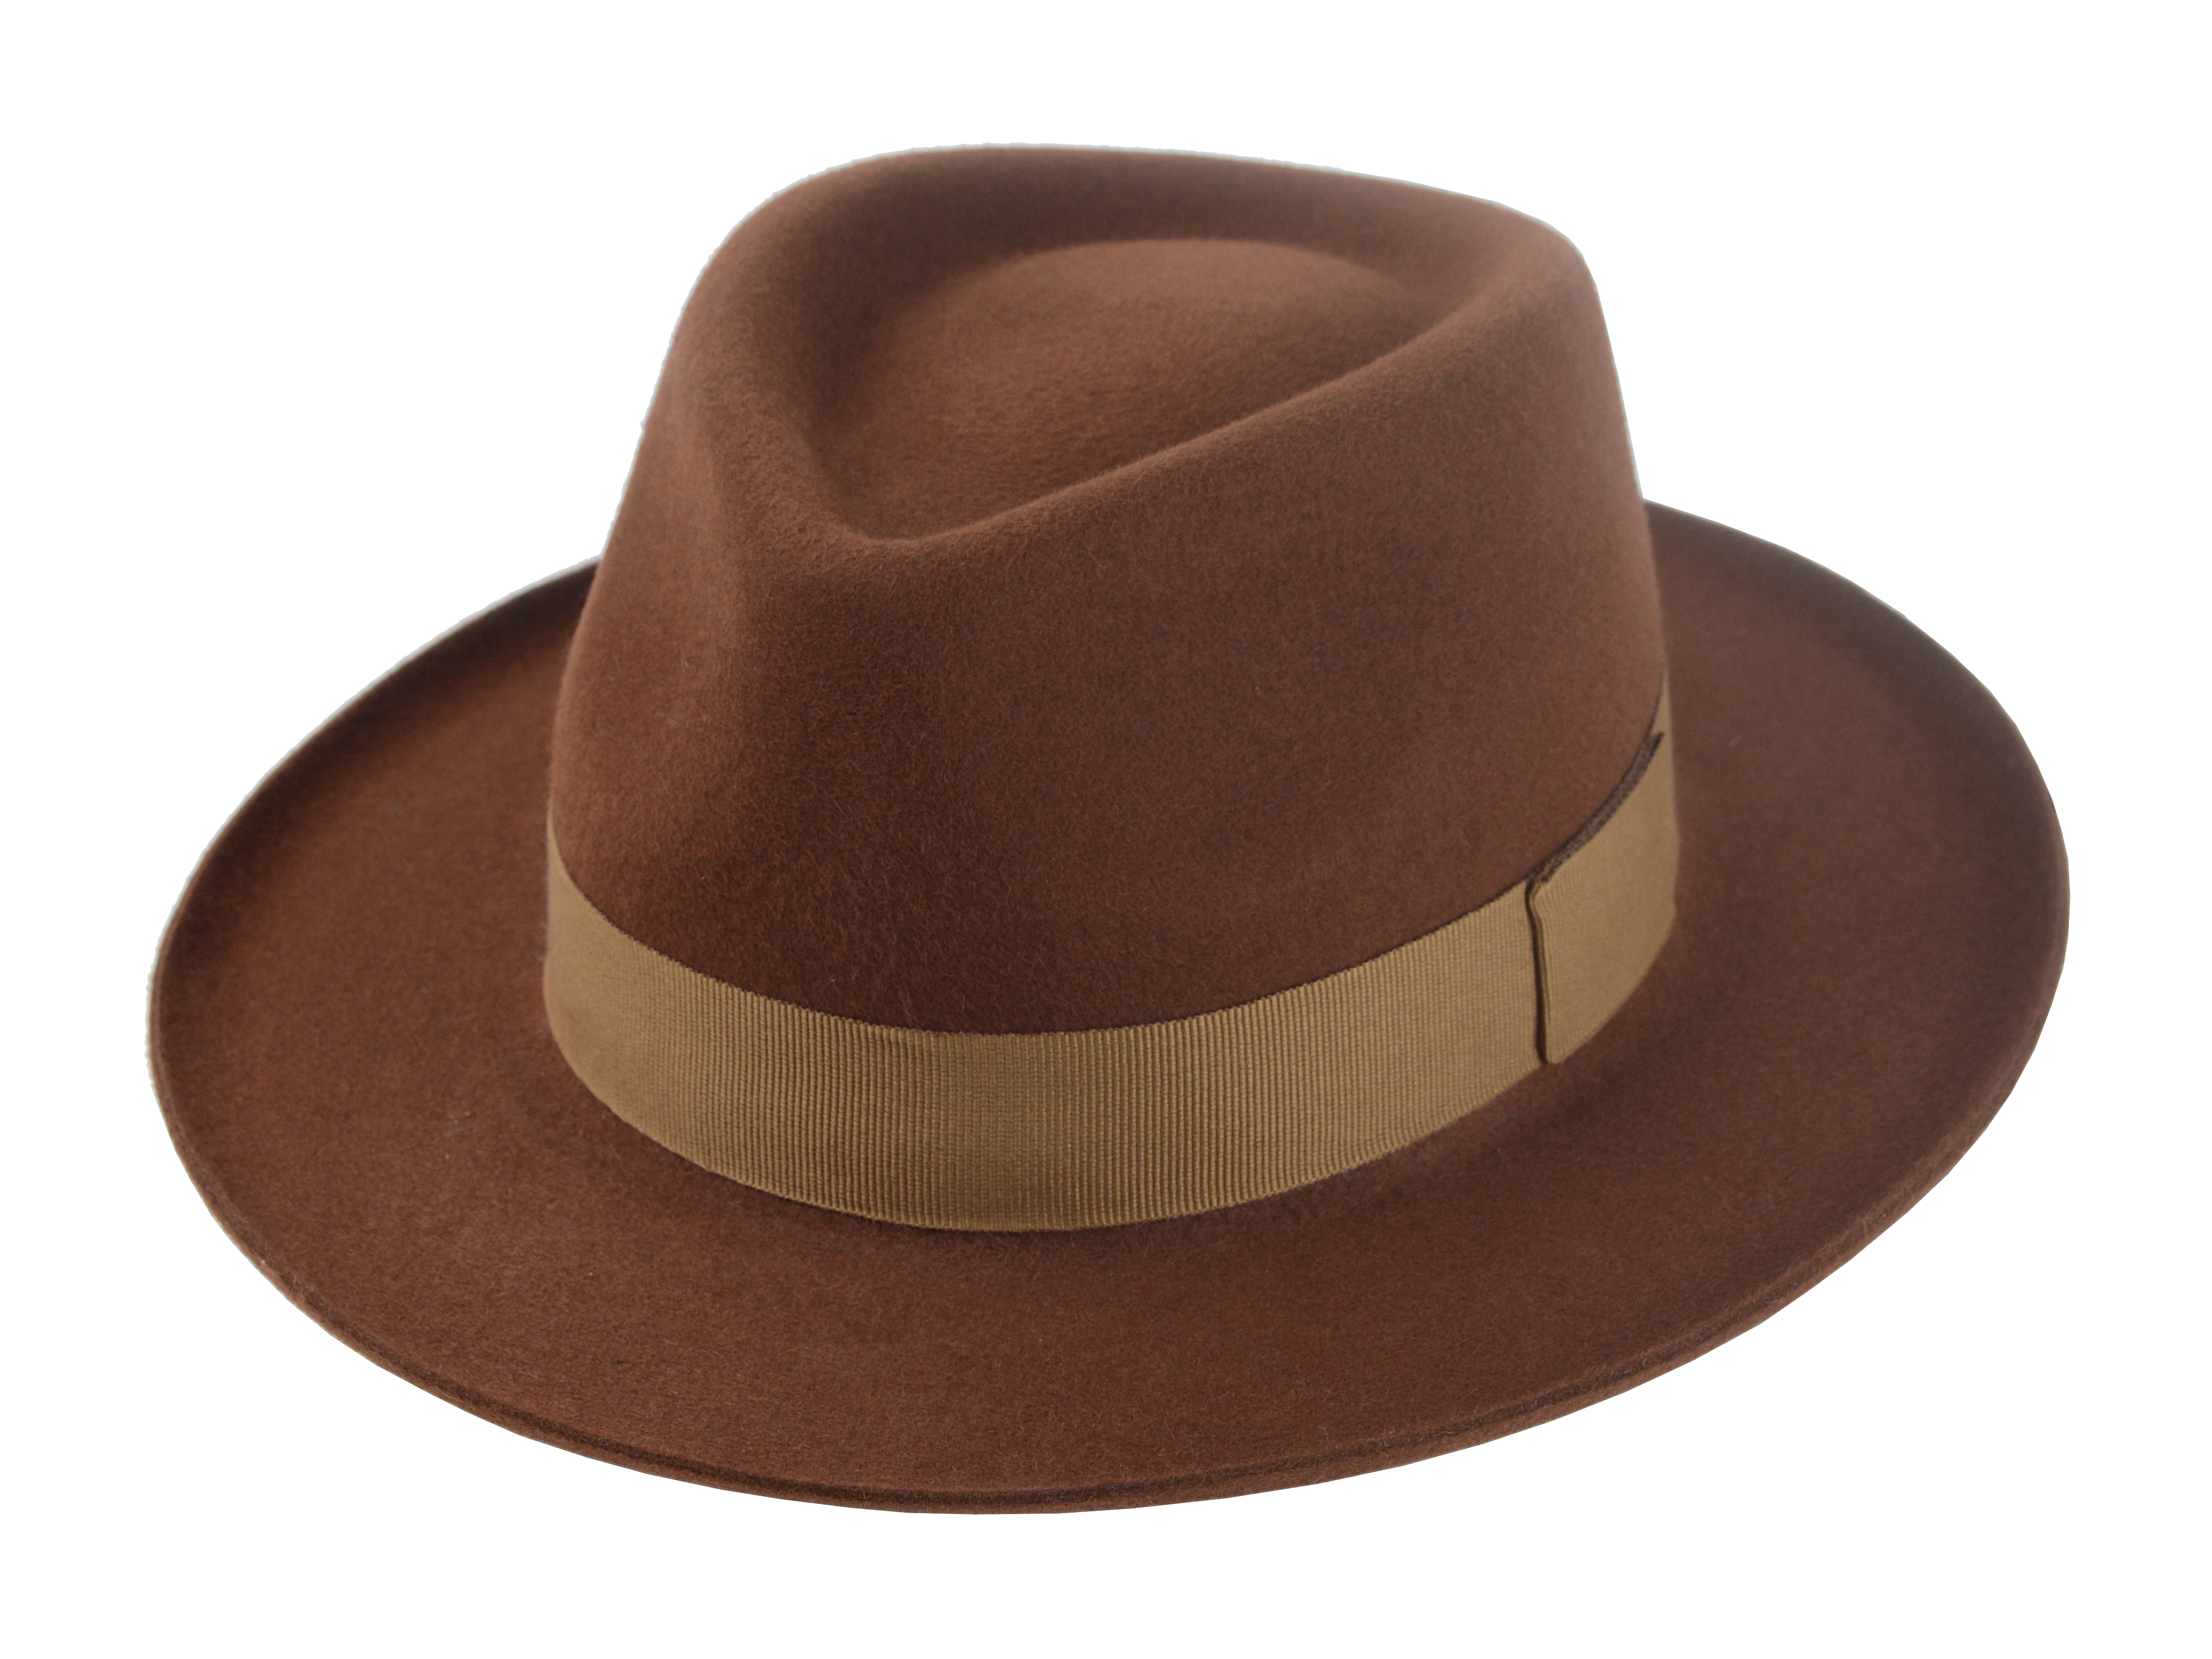 The Savant: Capturing the refined finish and style of the fedora | Agnoulita Hats